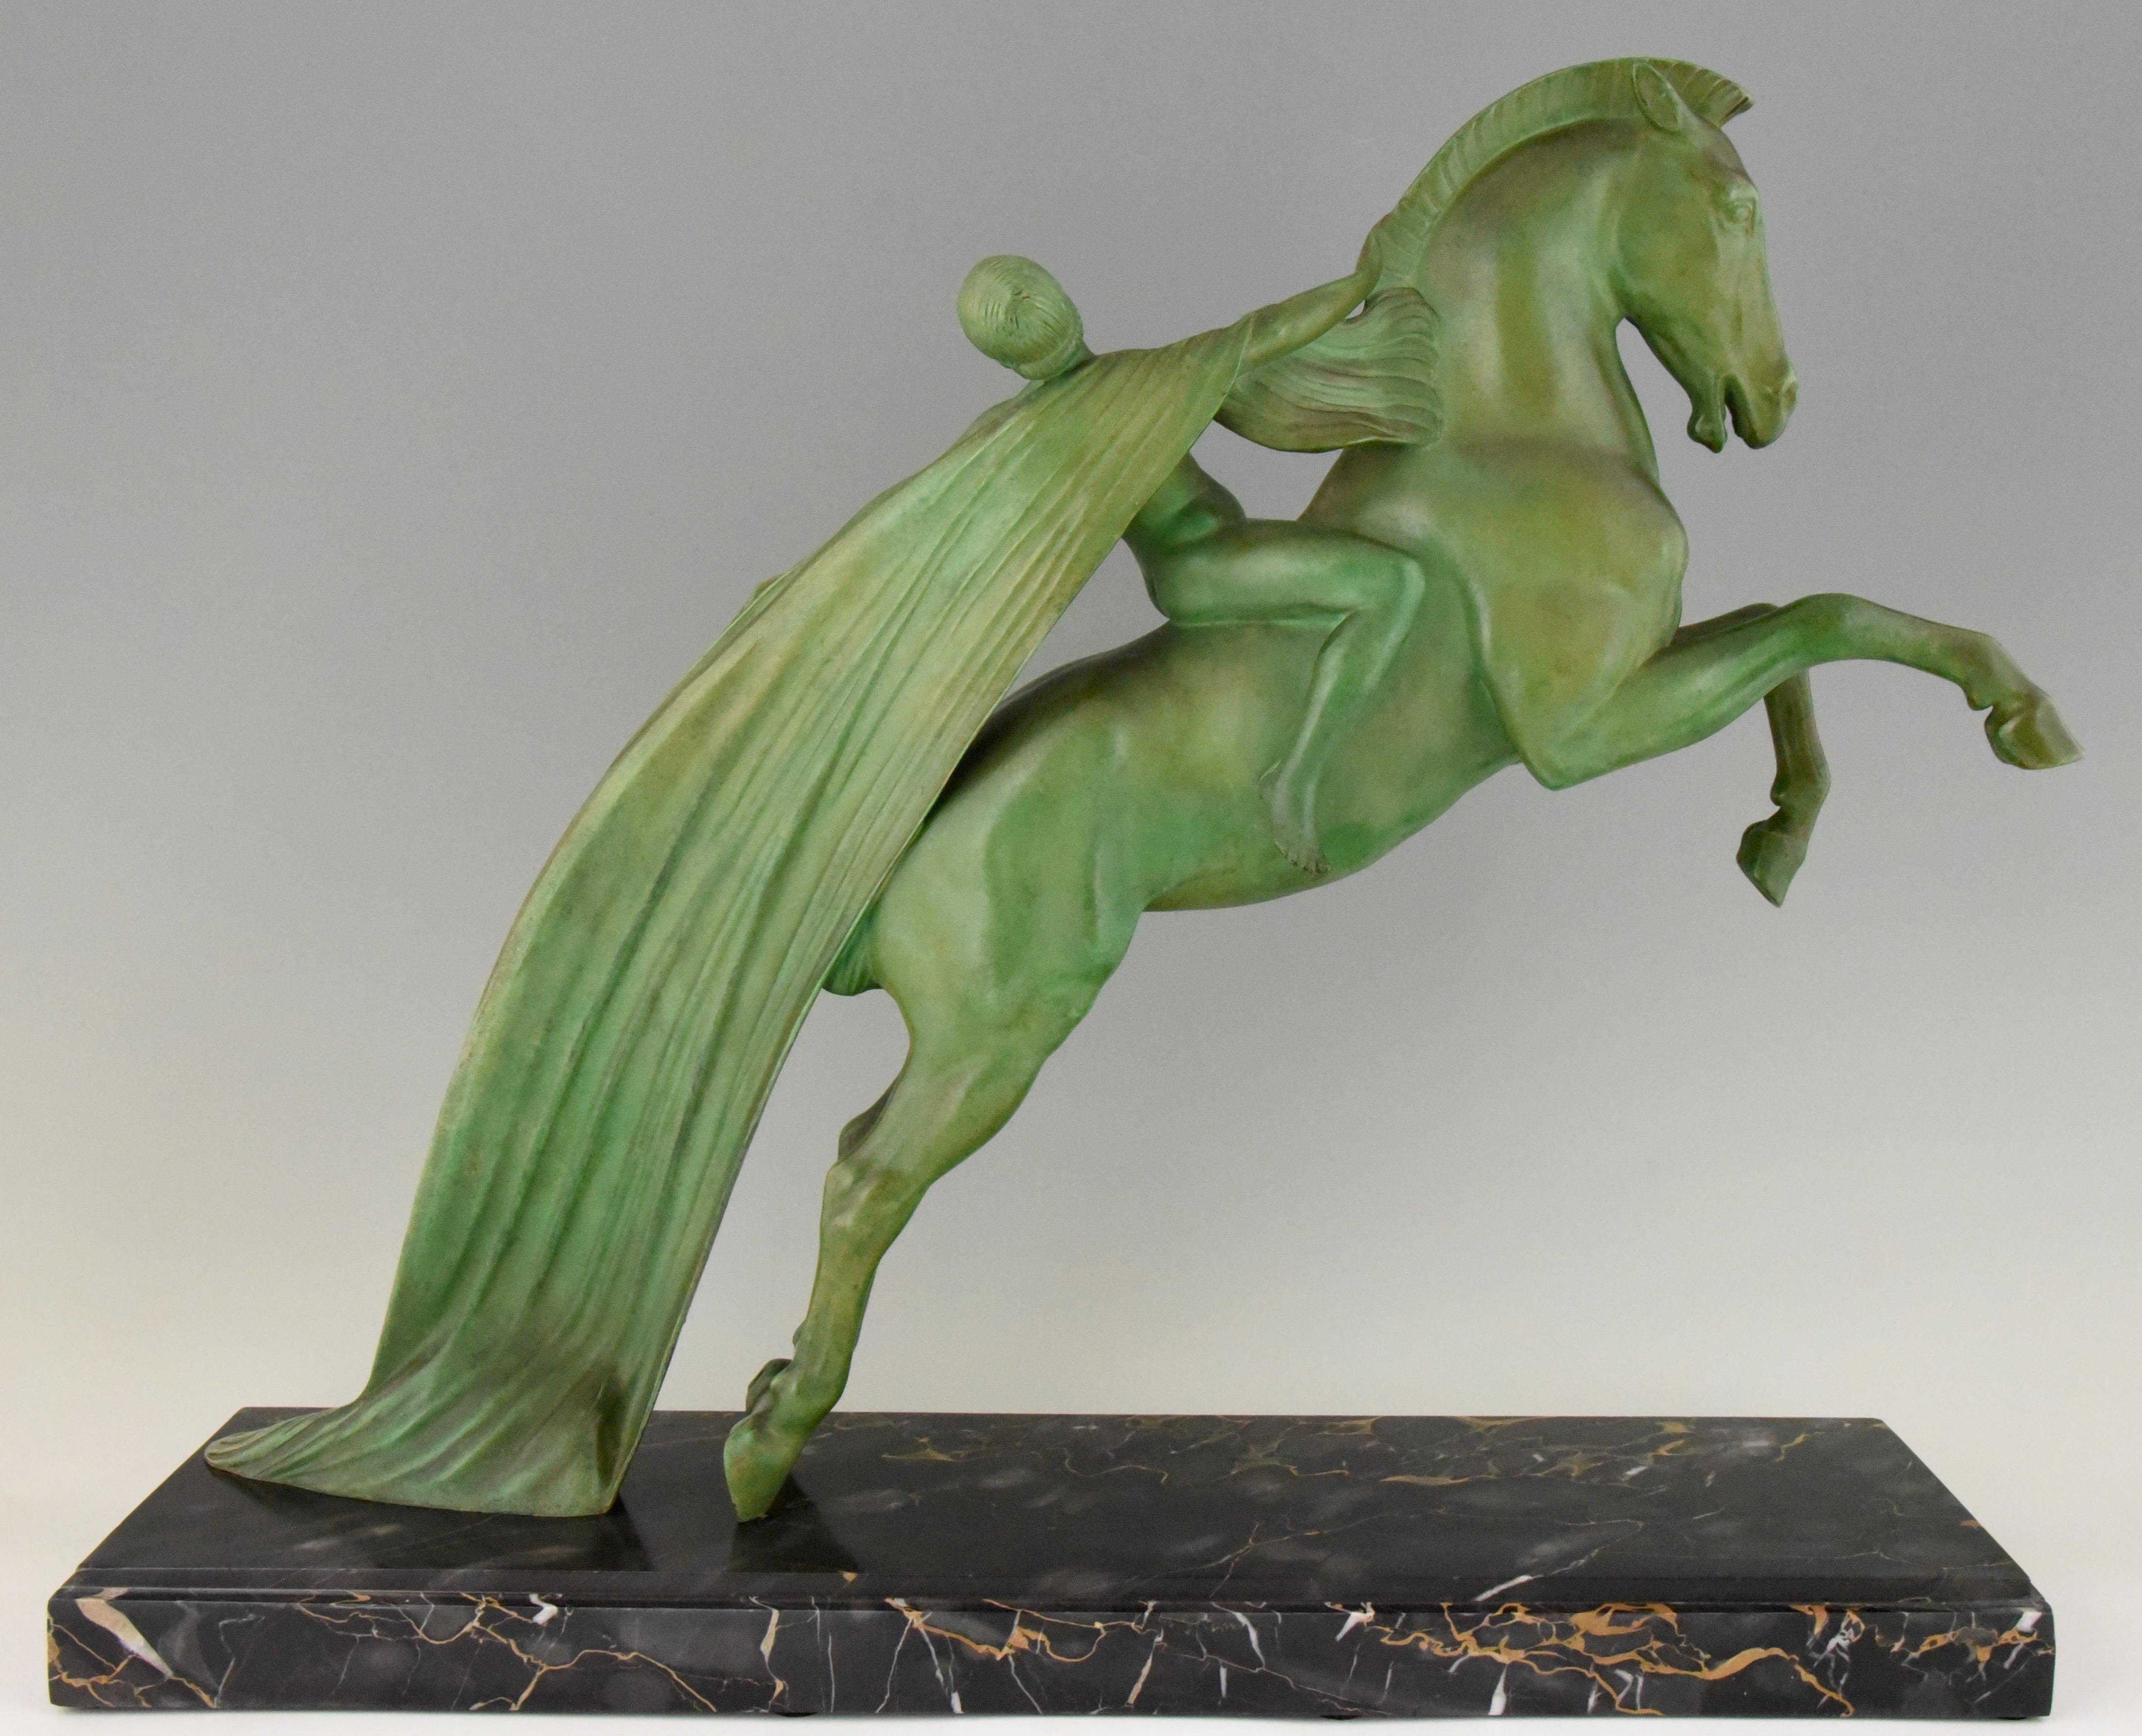 Art Deco Sculpture of a Female Nude on a Horse by Charles Charles  1930 France (20. Jahrhundert)